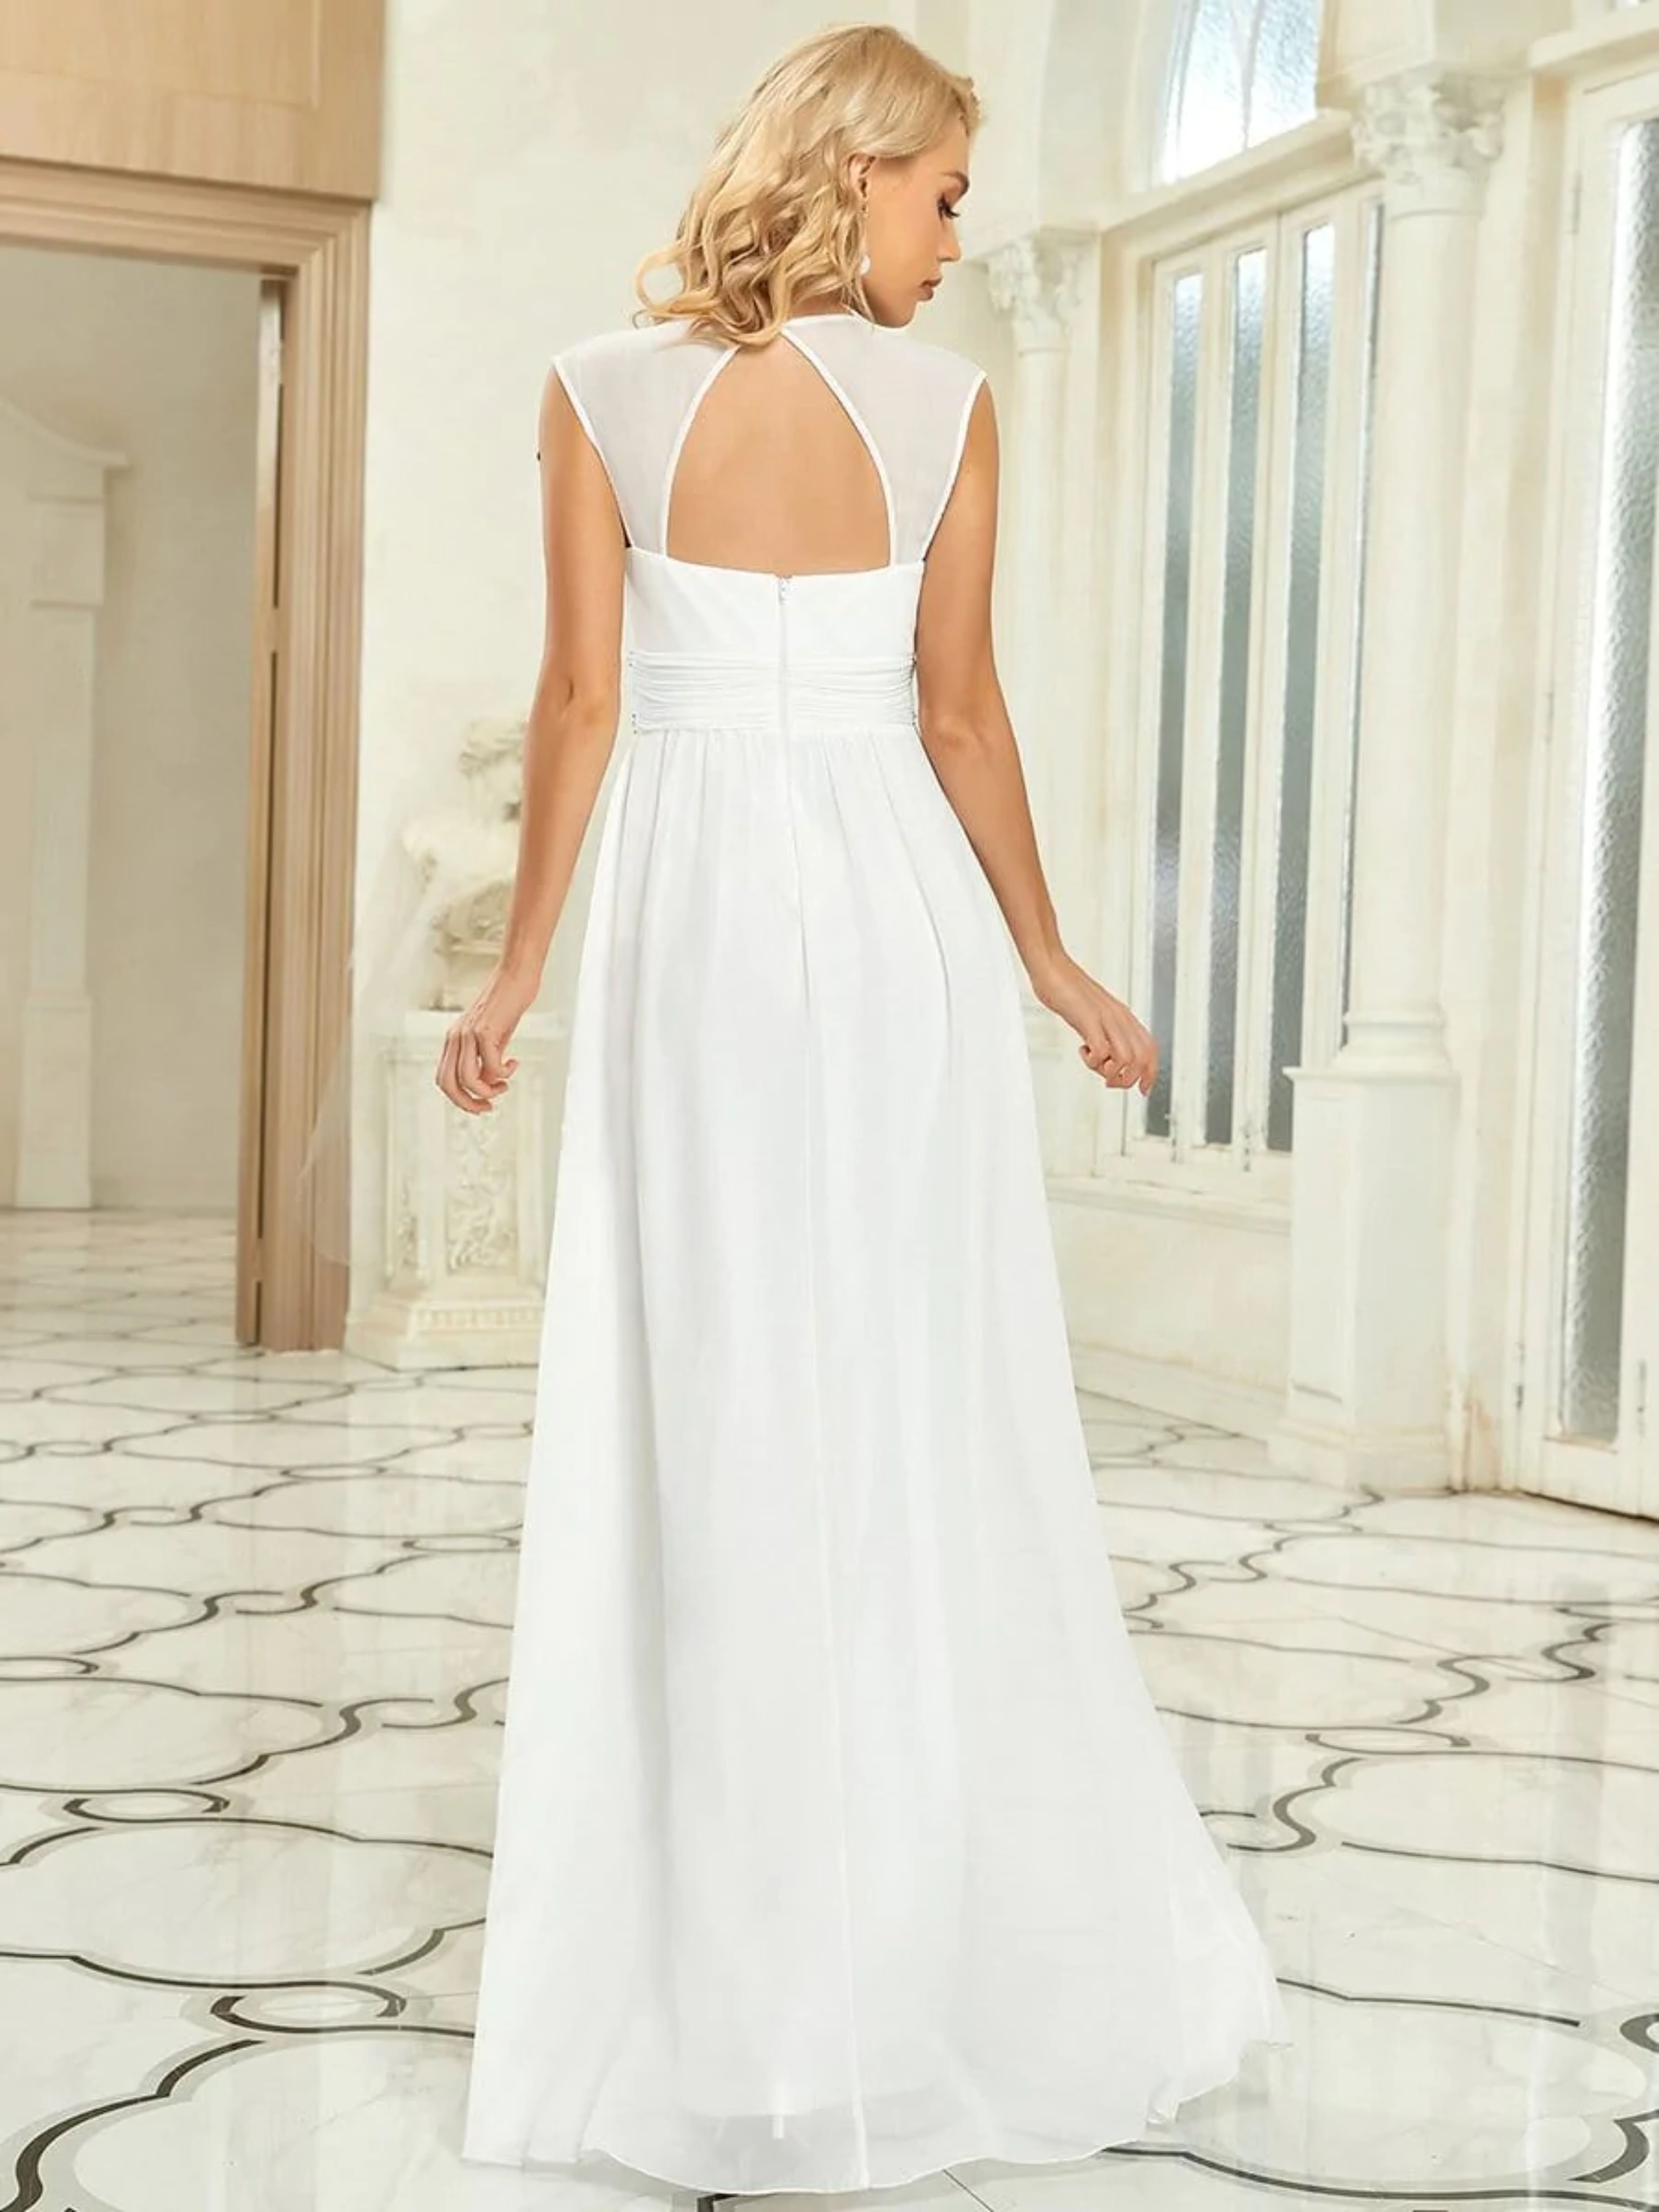 CHIFFON WEDDING DRESS WITH DECORATIVE BEADED DETAIL ON THE WAIST. THE PLUNGING V-NECK AND CAPPED SLEEVELESS TOP FEATURE FLATTERING RUCHING THROUGHOUT, ALONG WITH A FLOWING A-LINE SILHOUETTE.